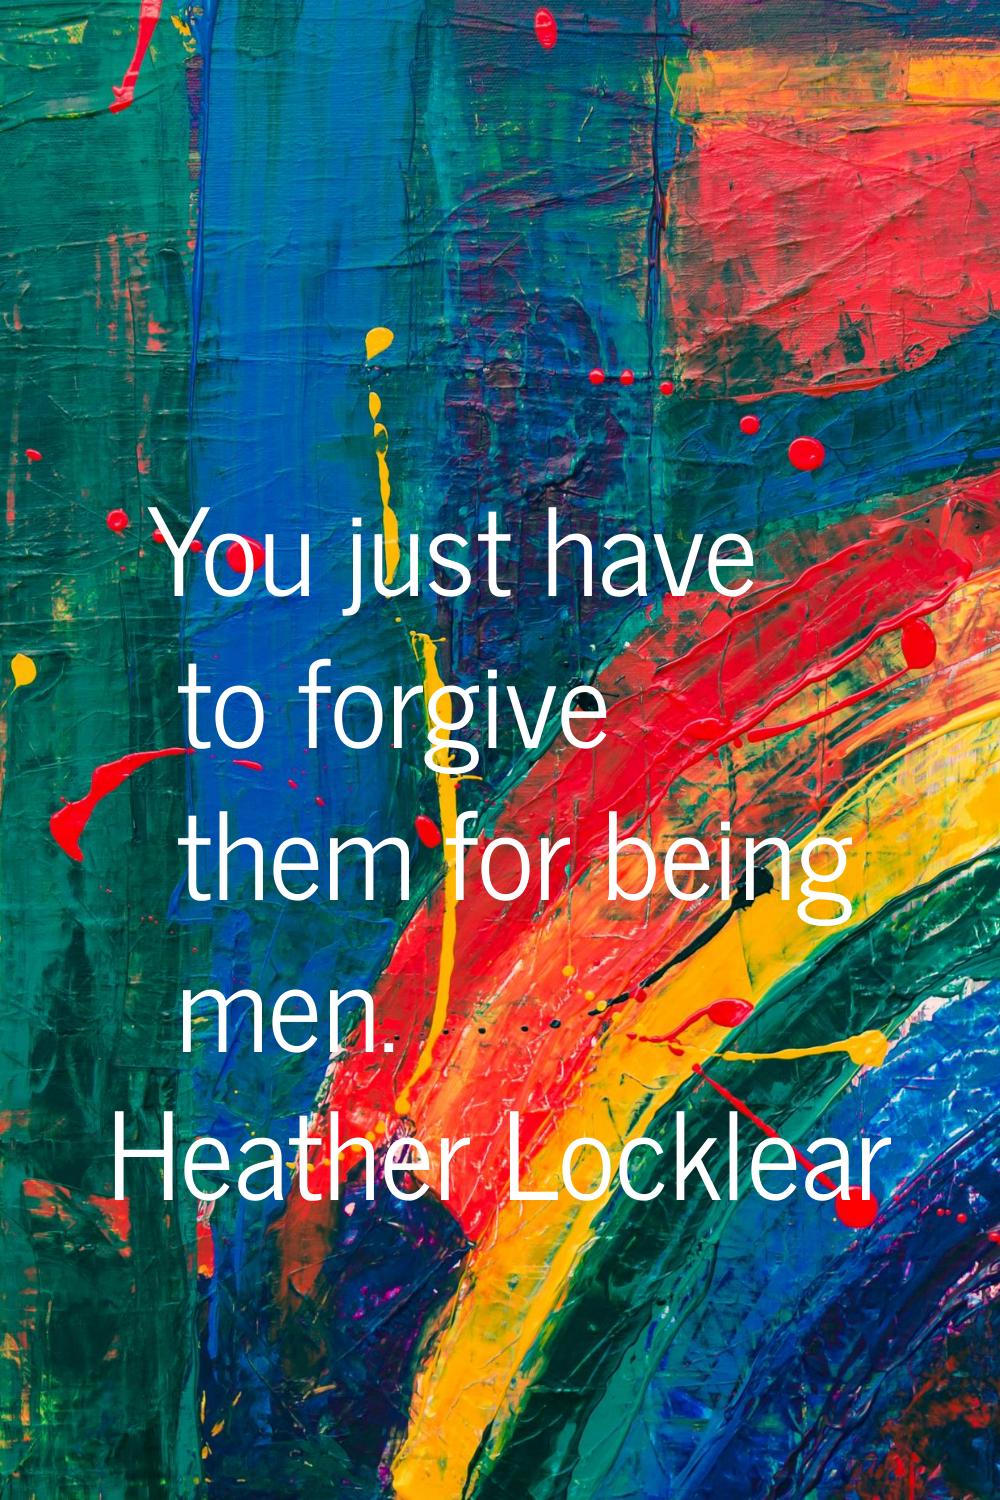 You just have to forgive them for being men.